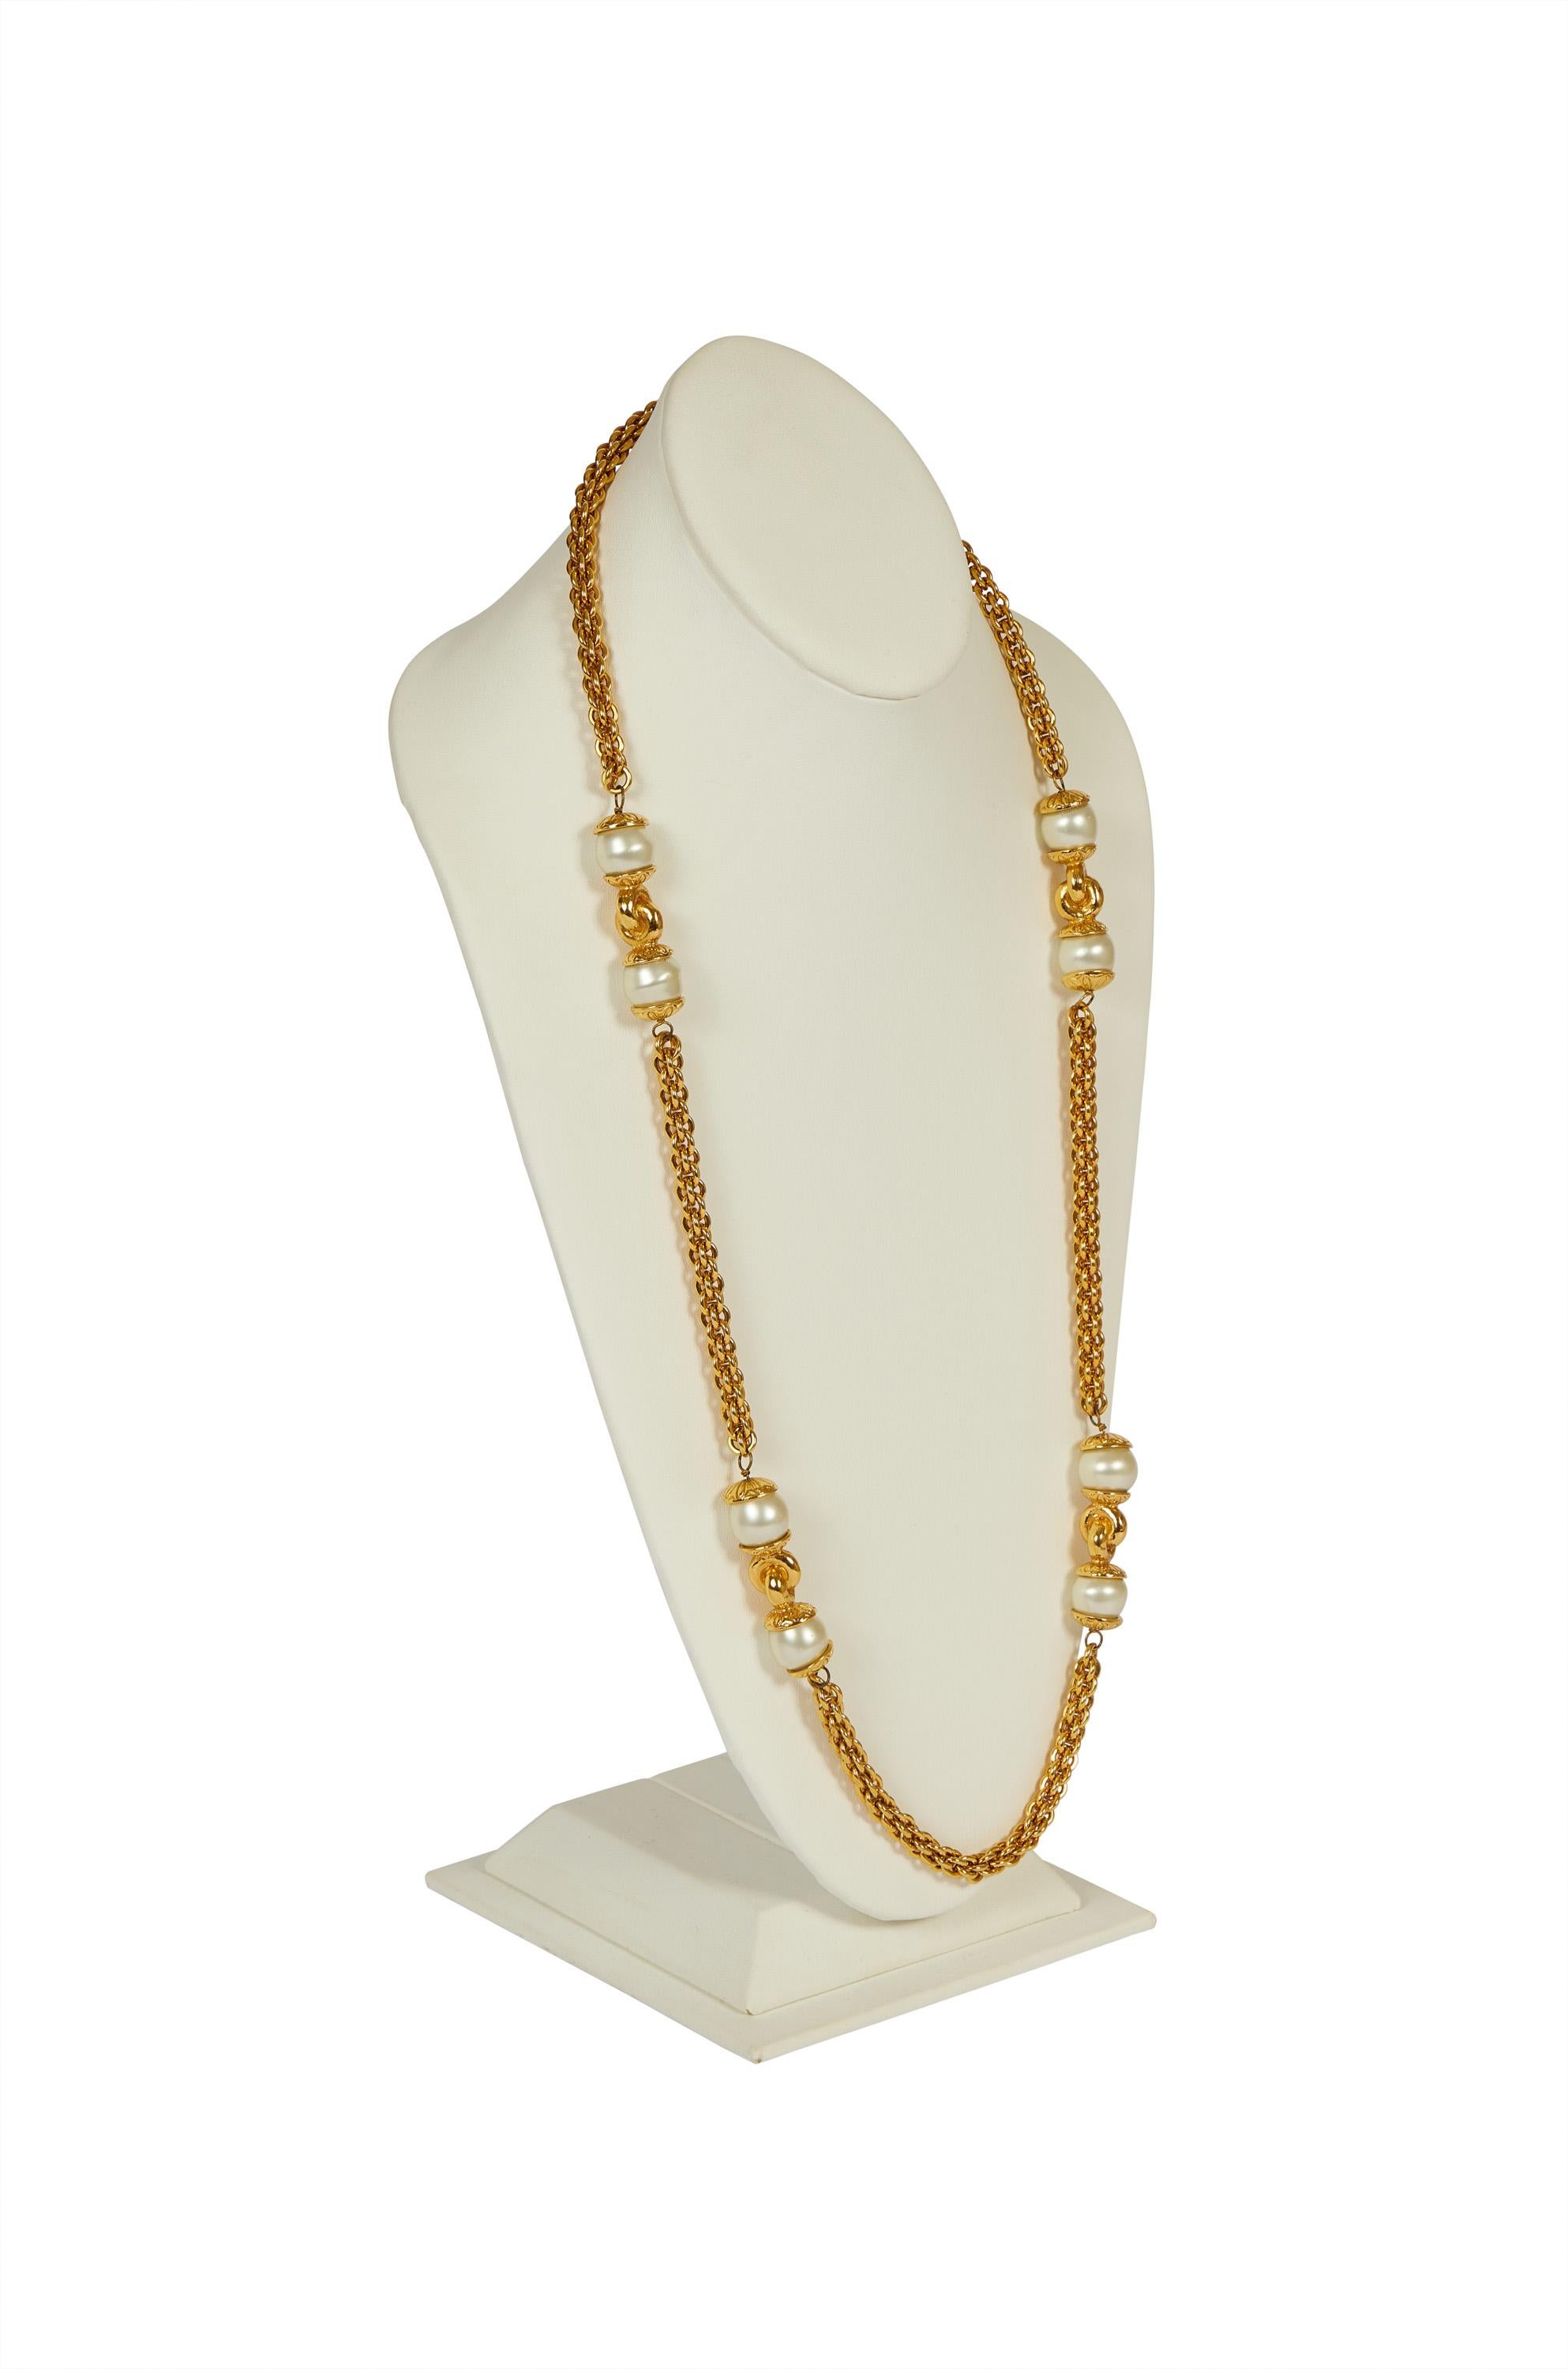 Chanel 70s long sautoir necklace with faux gripoix mabe pearls. Excellent condition. Comes with original pouch or box.